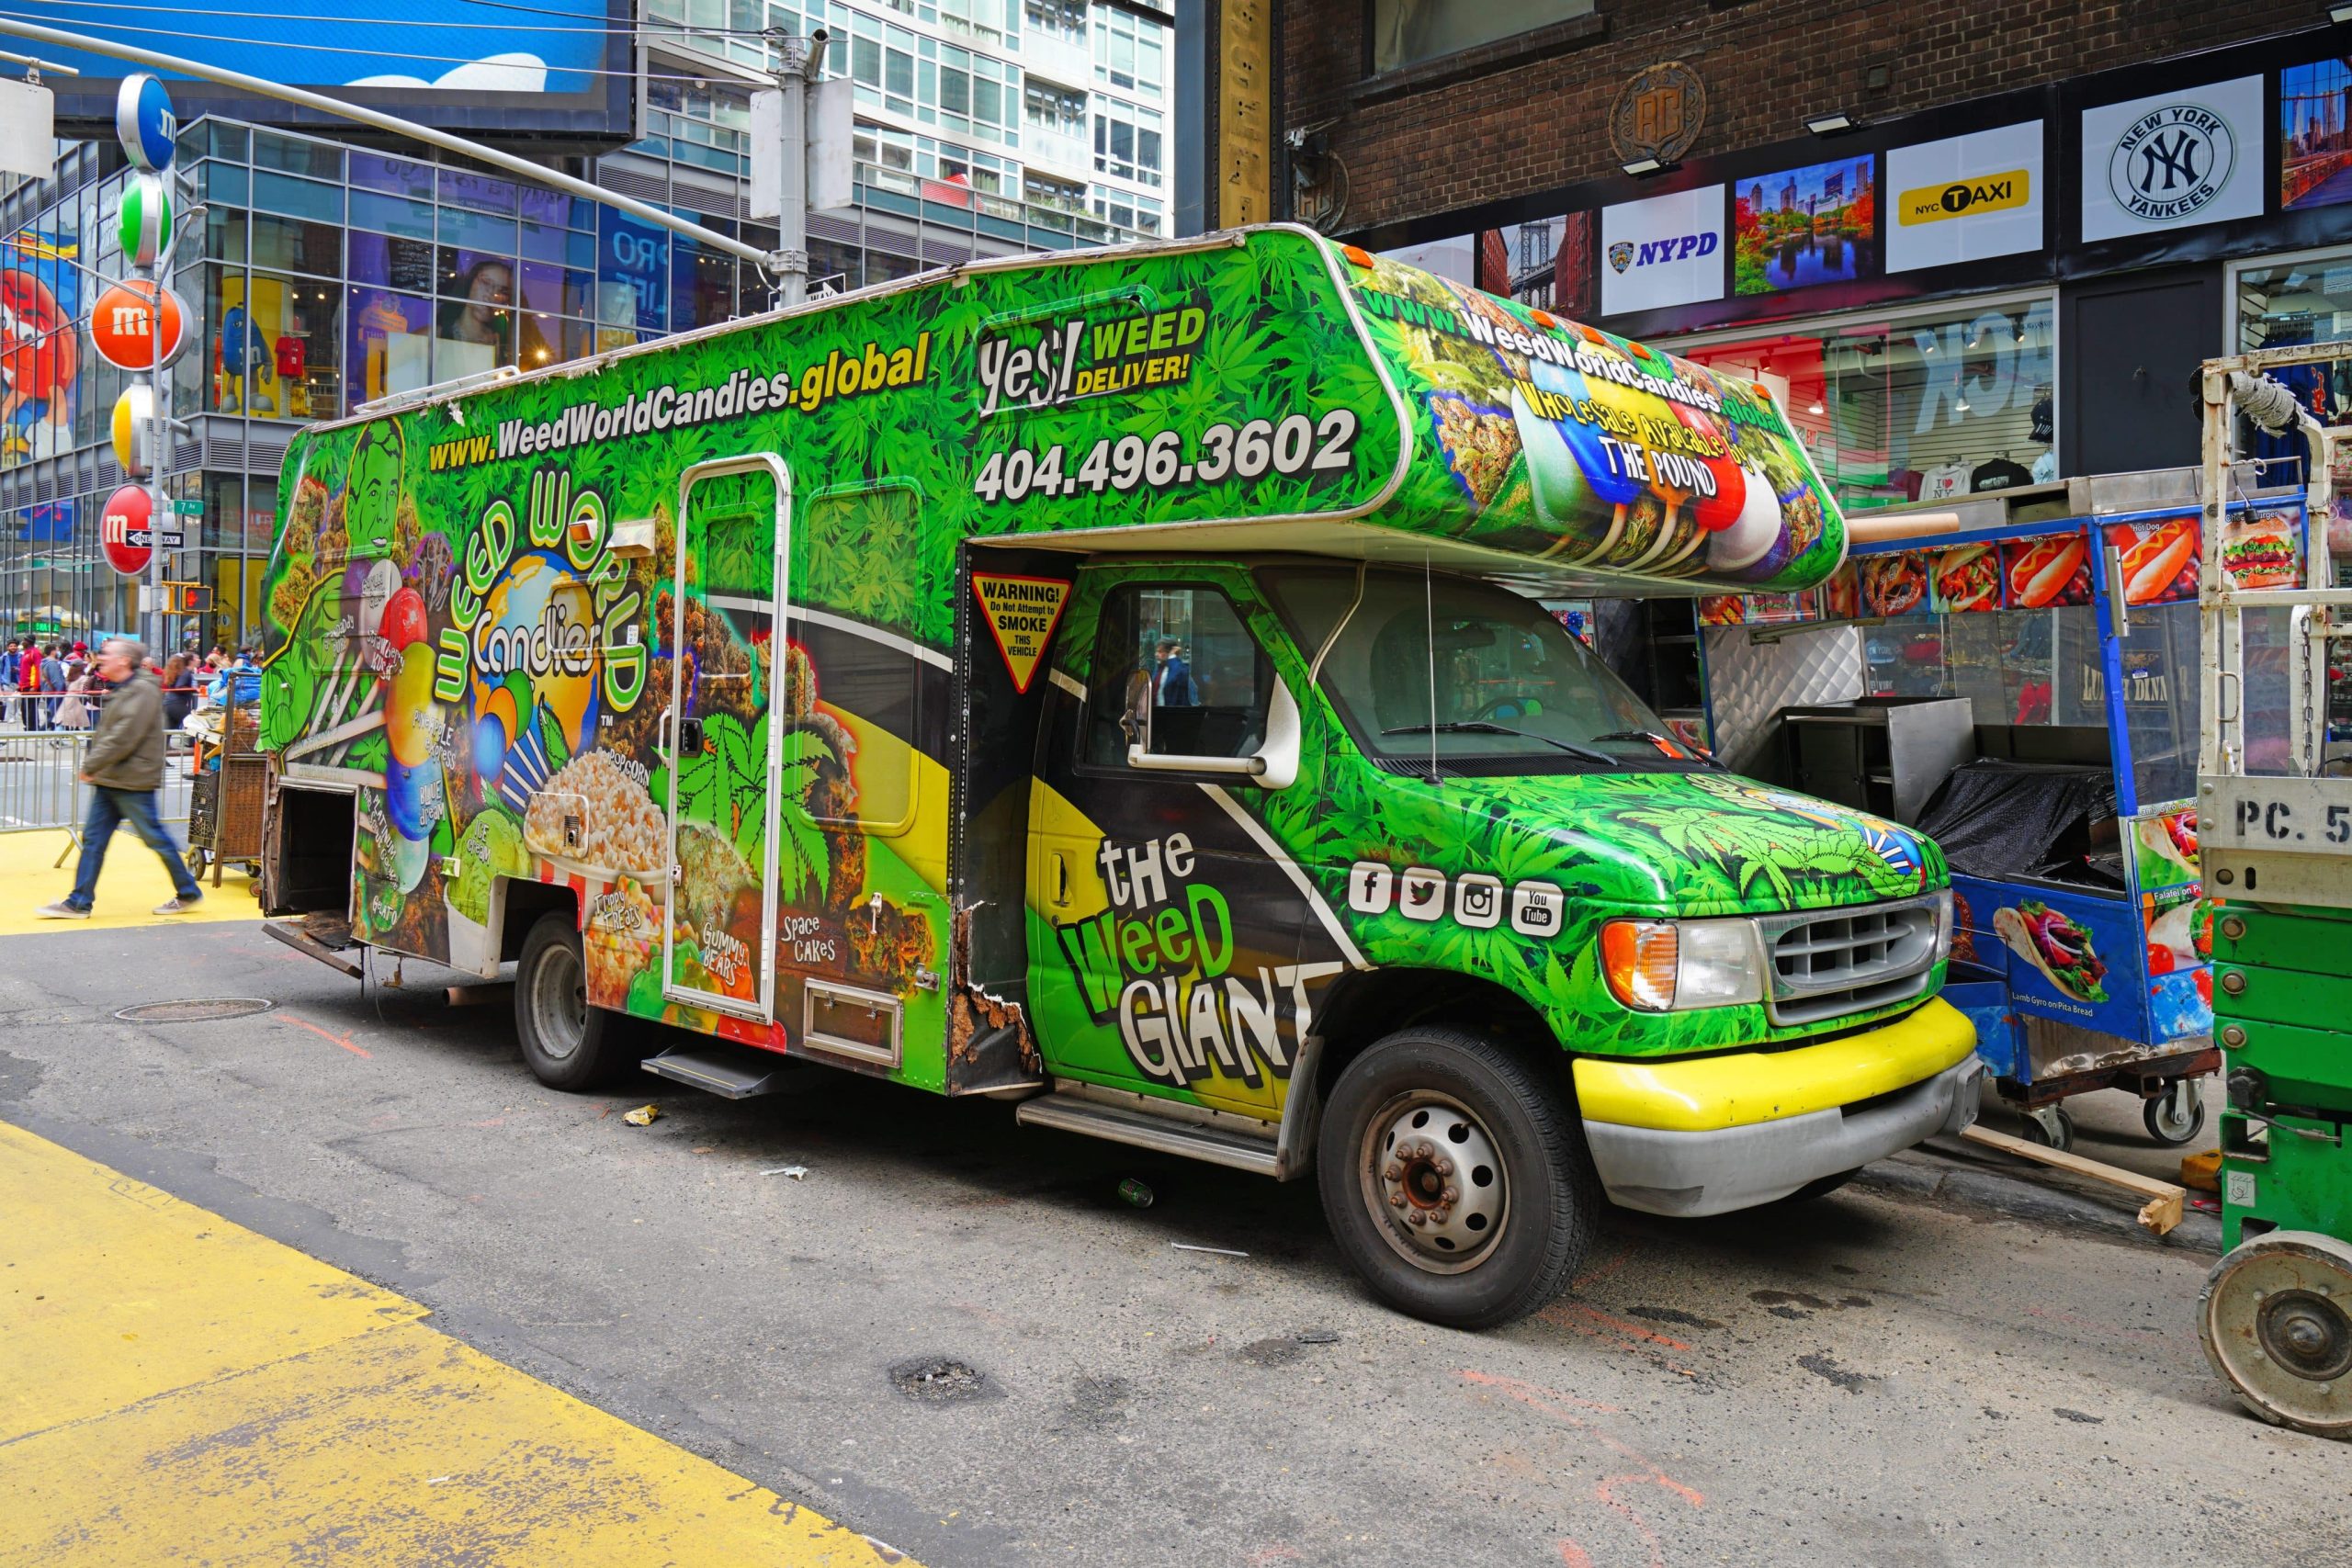 New York City Police Crack Down on Weed Trucks in Times Square